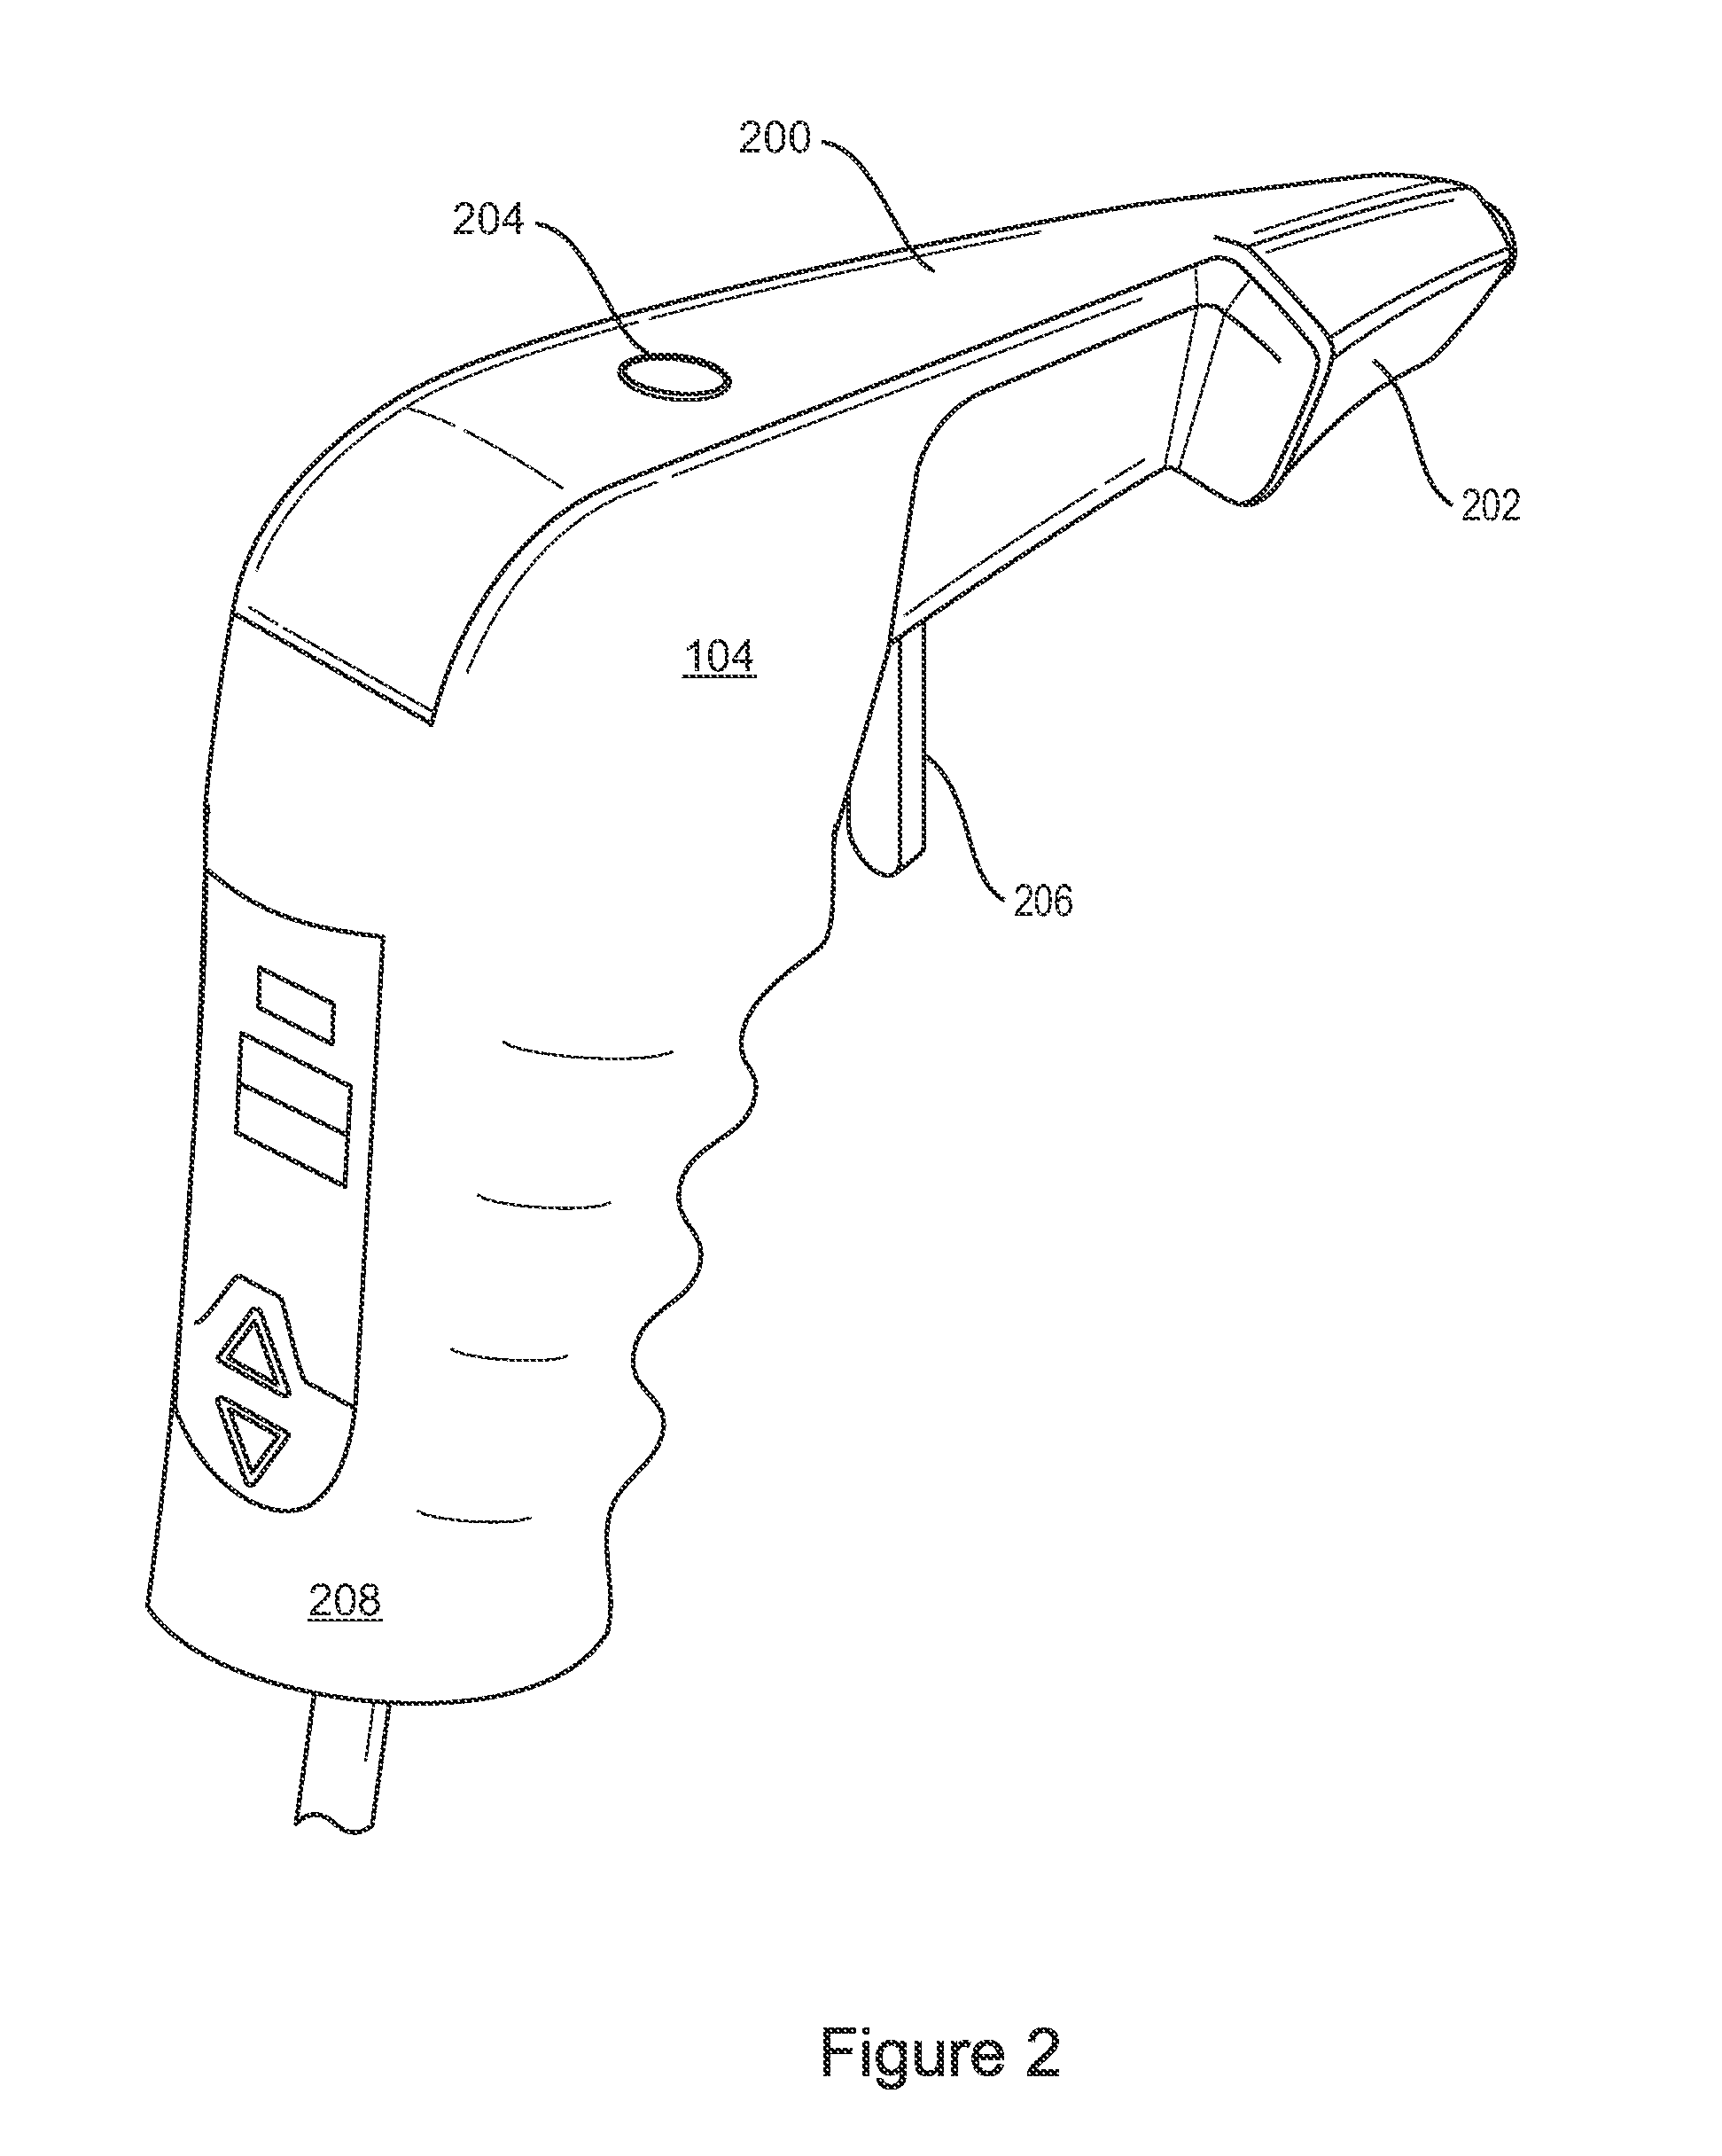 Non-surgical method for tightening both external pubic and internal vaginal tissues in a single procedure